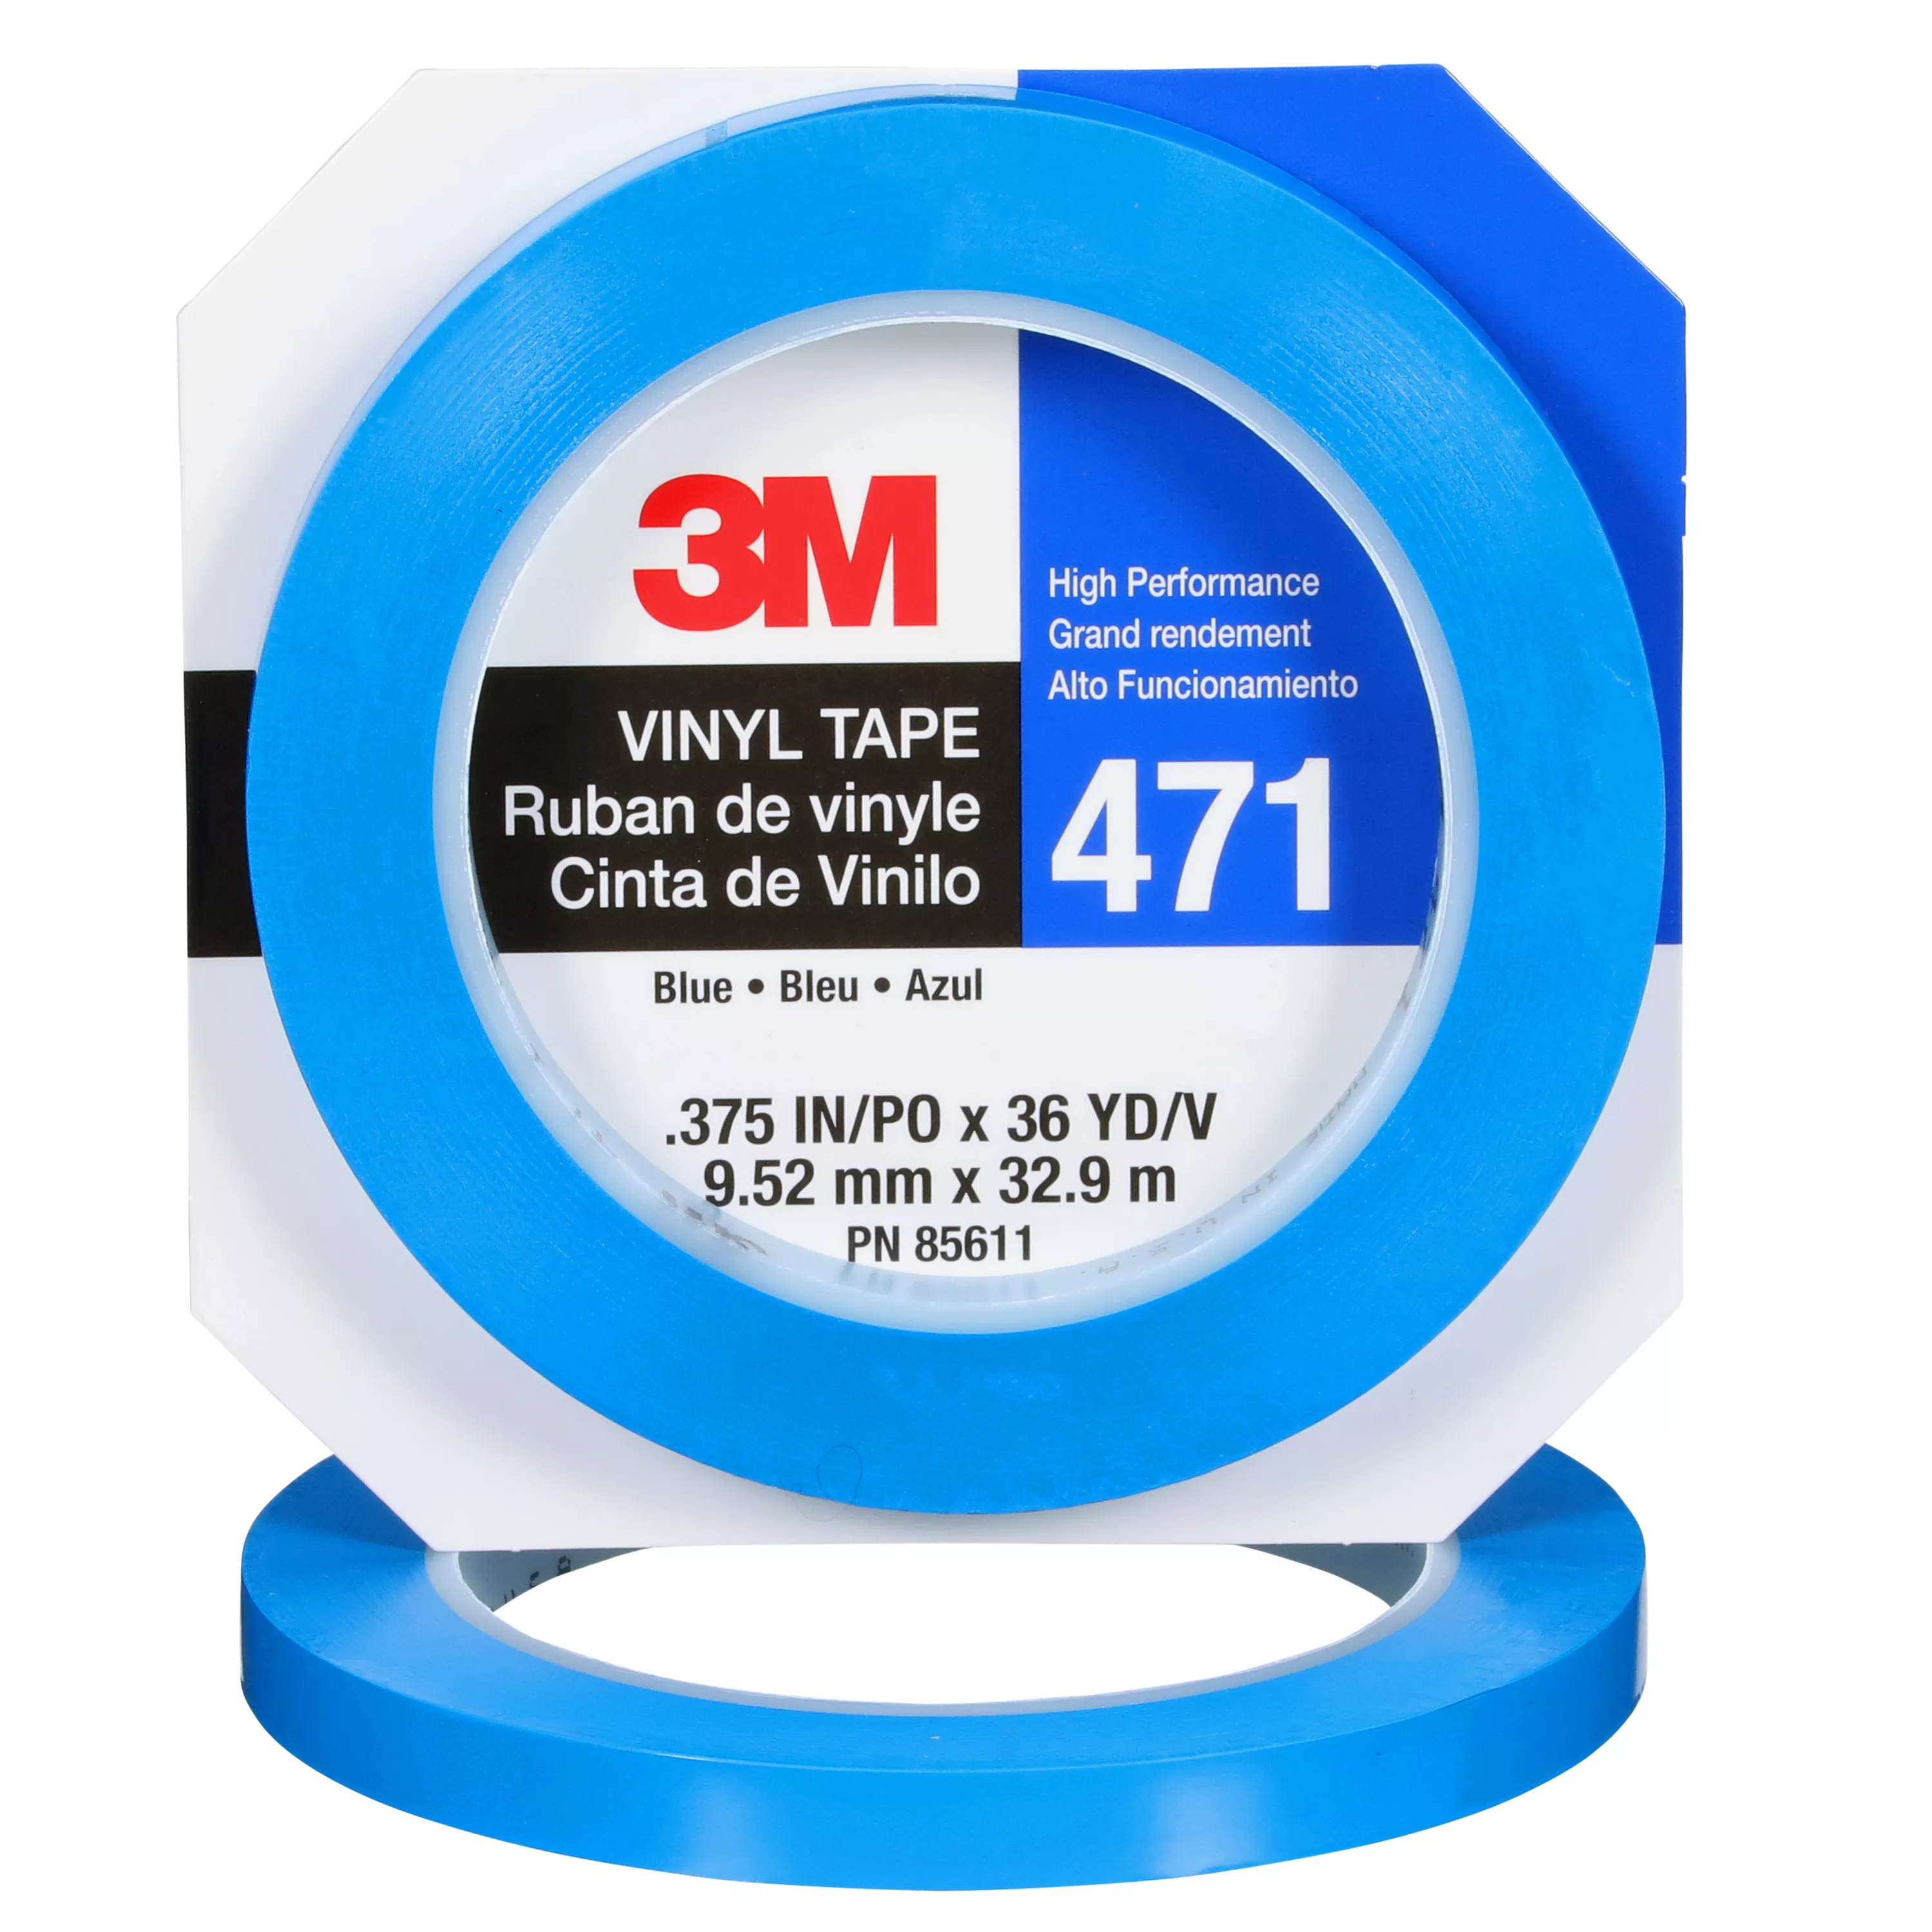 3M™ Vinyl Tape 471, Blue, 3/8 in x 36 yd, 5.2 mil, 96 Roll/Case,
Individually Wrapped Conveniently Packaged